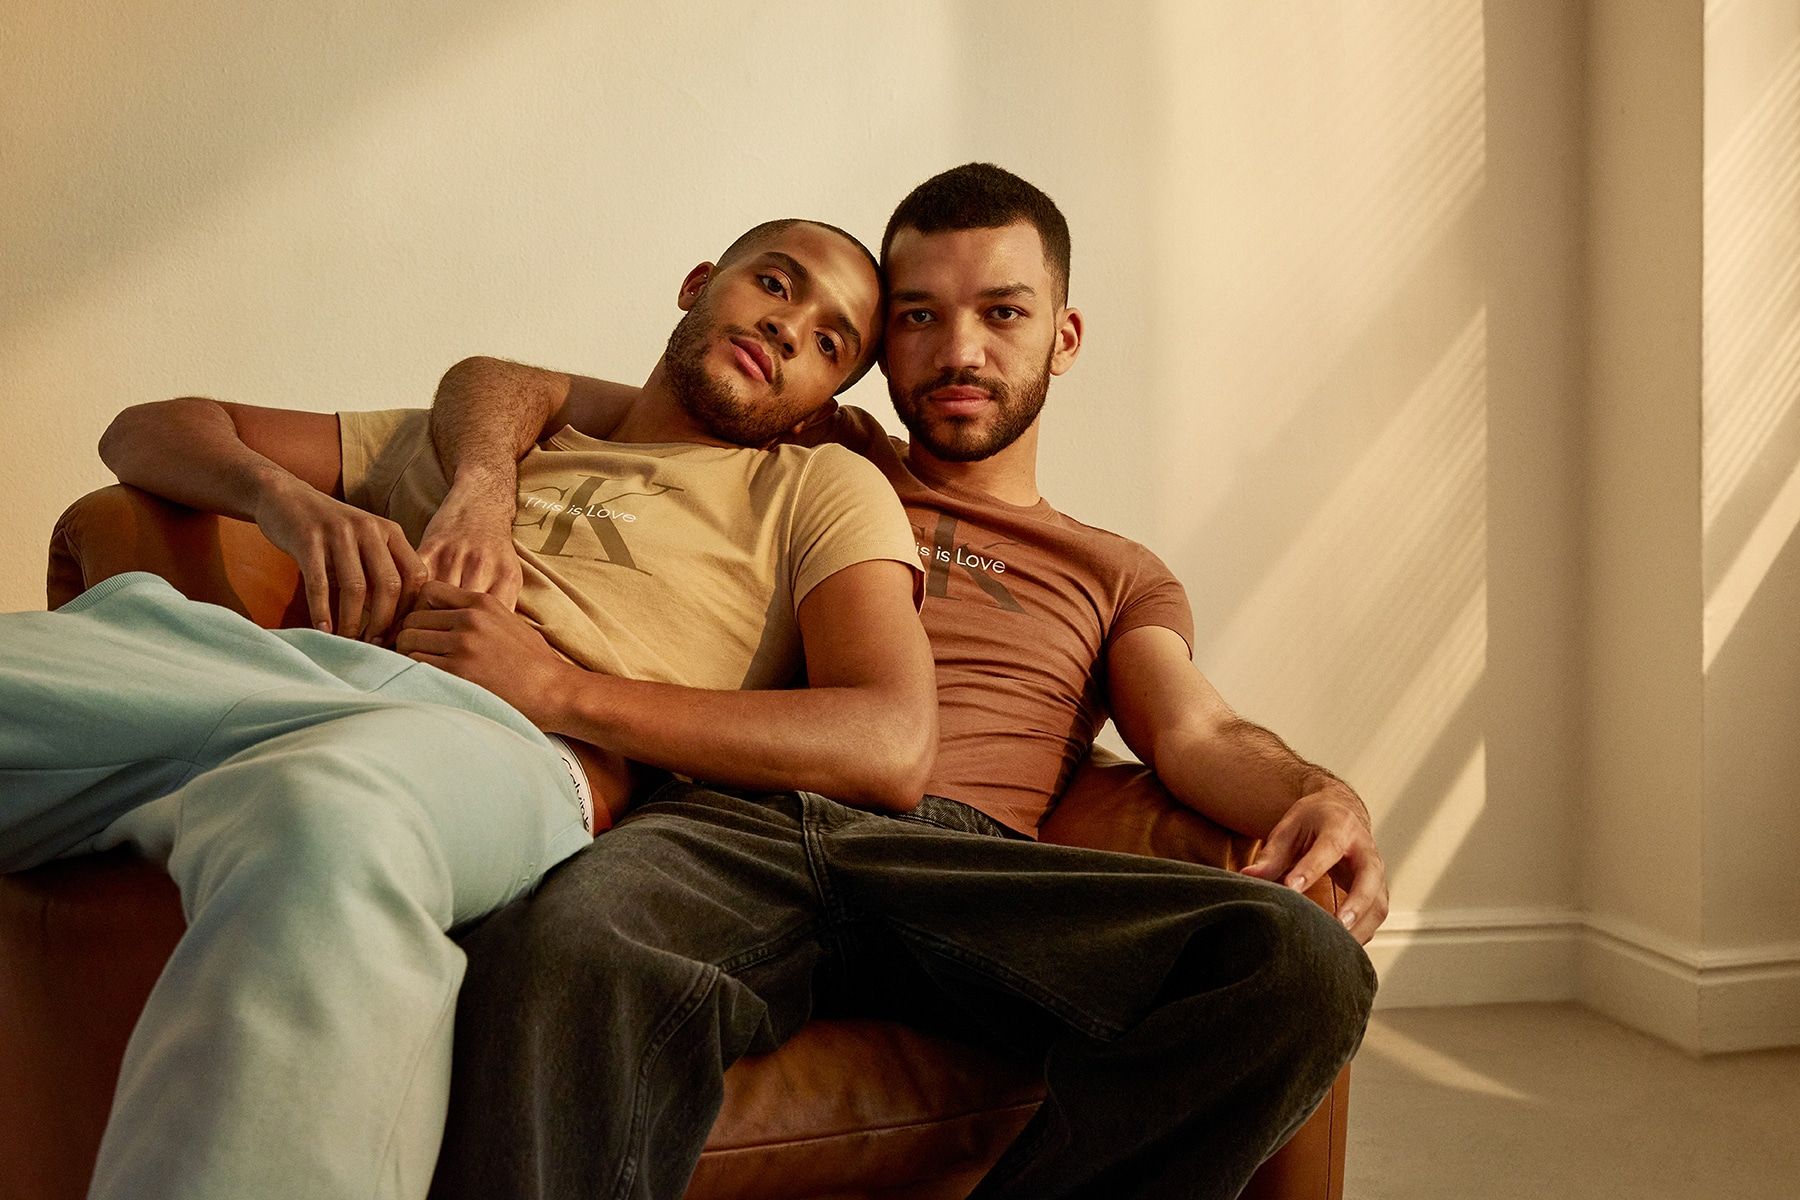 Calvin Klein celebrates the family we choose in its 'This is Love' campaign